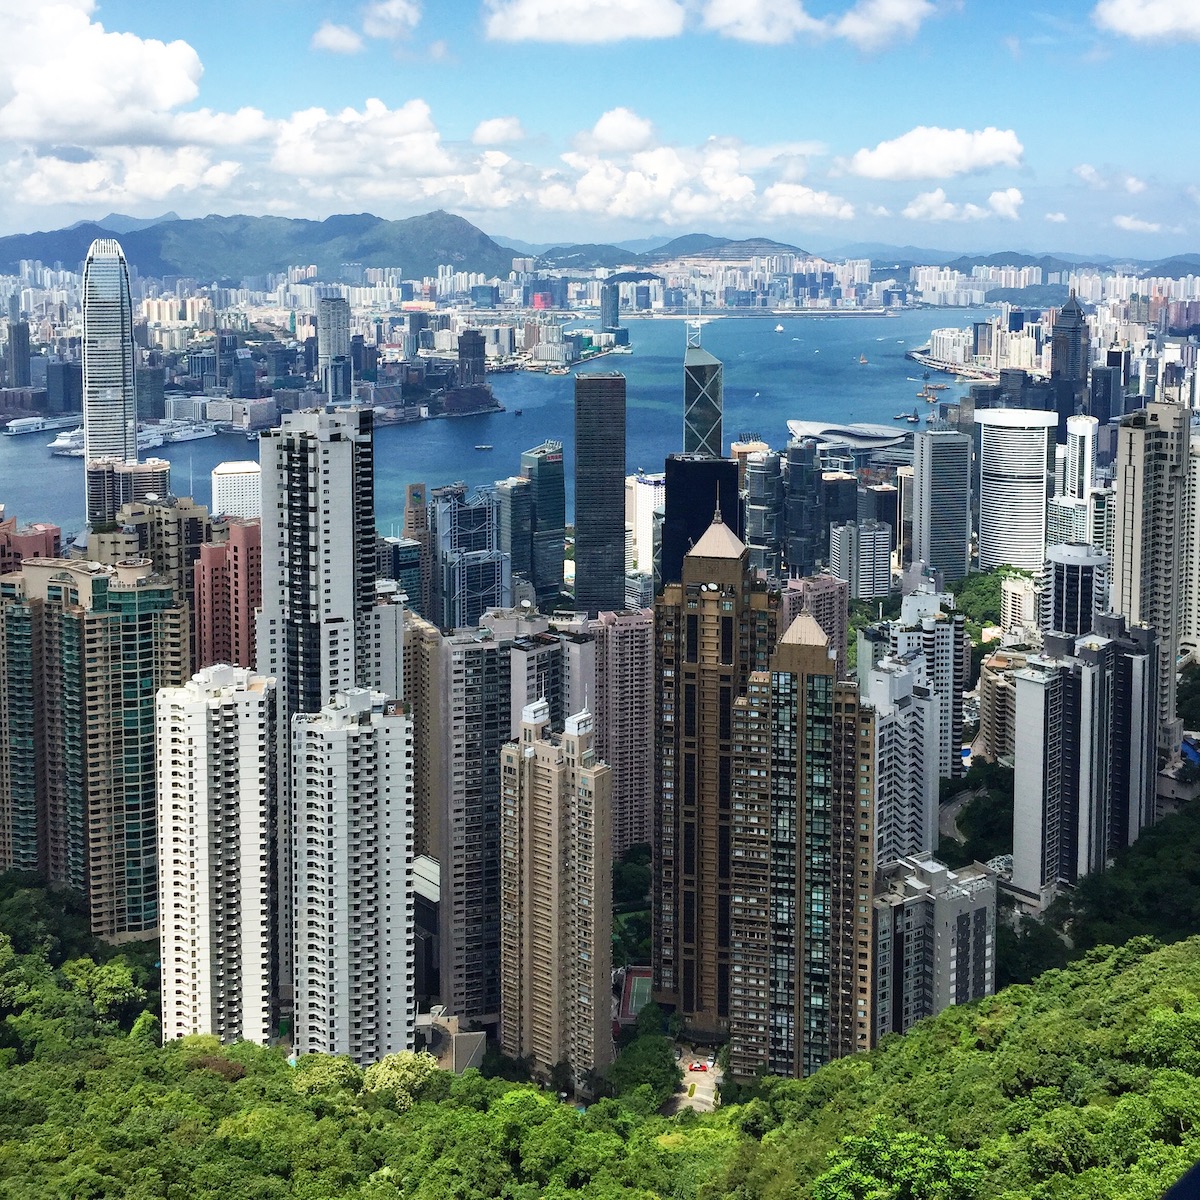 Marriott’s free “influencer” trip to Hong Kong and the ethics of comped travel